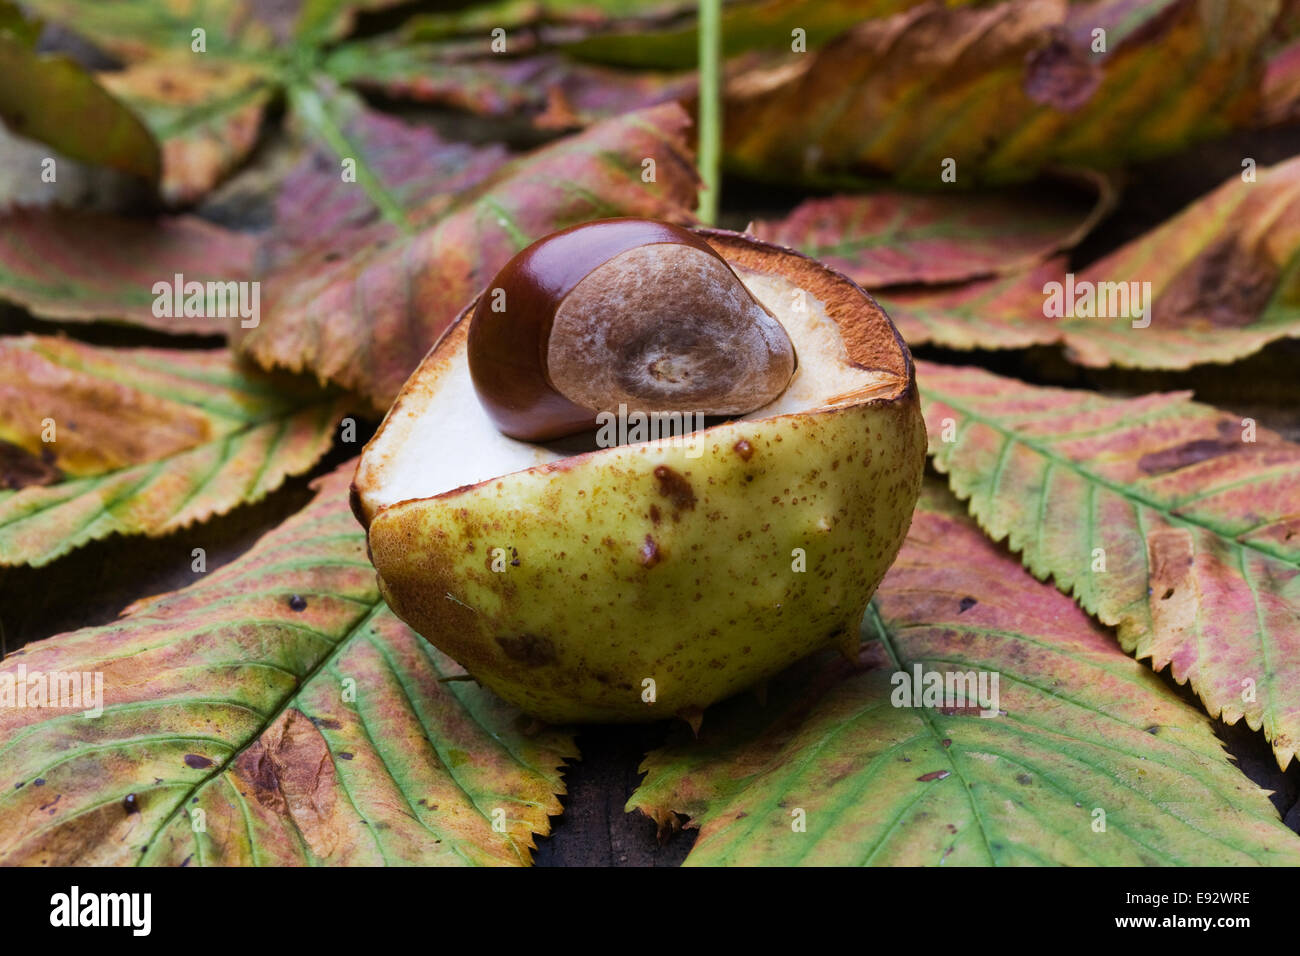 Aesculus hippocastanum. A single horse chestnut in it's casing. Stock Photo